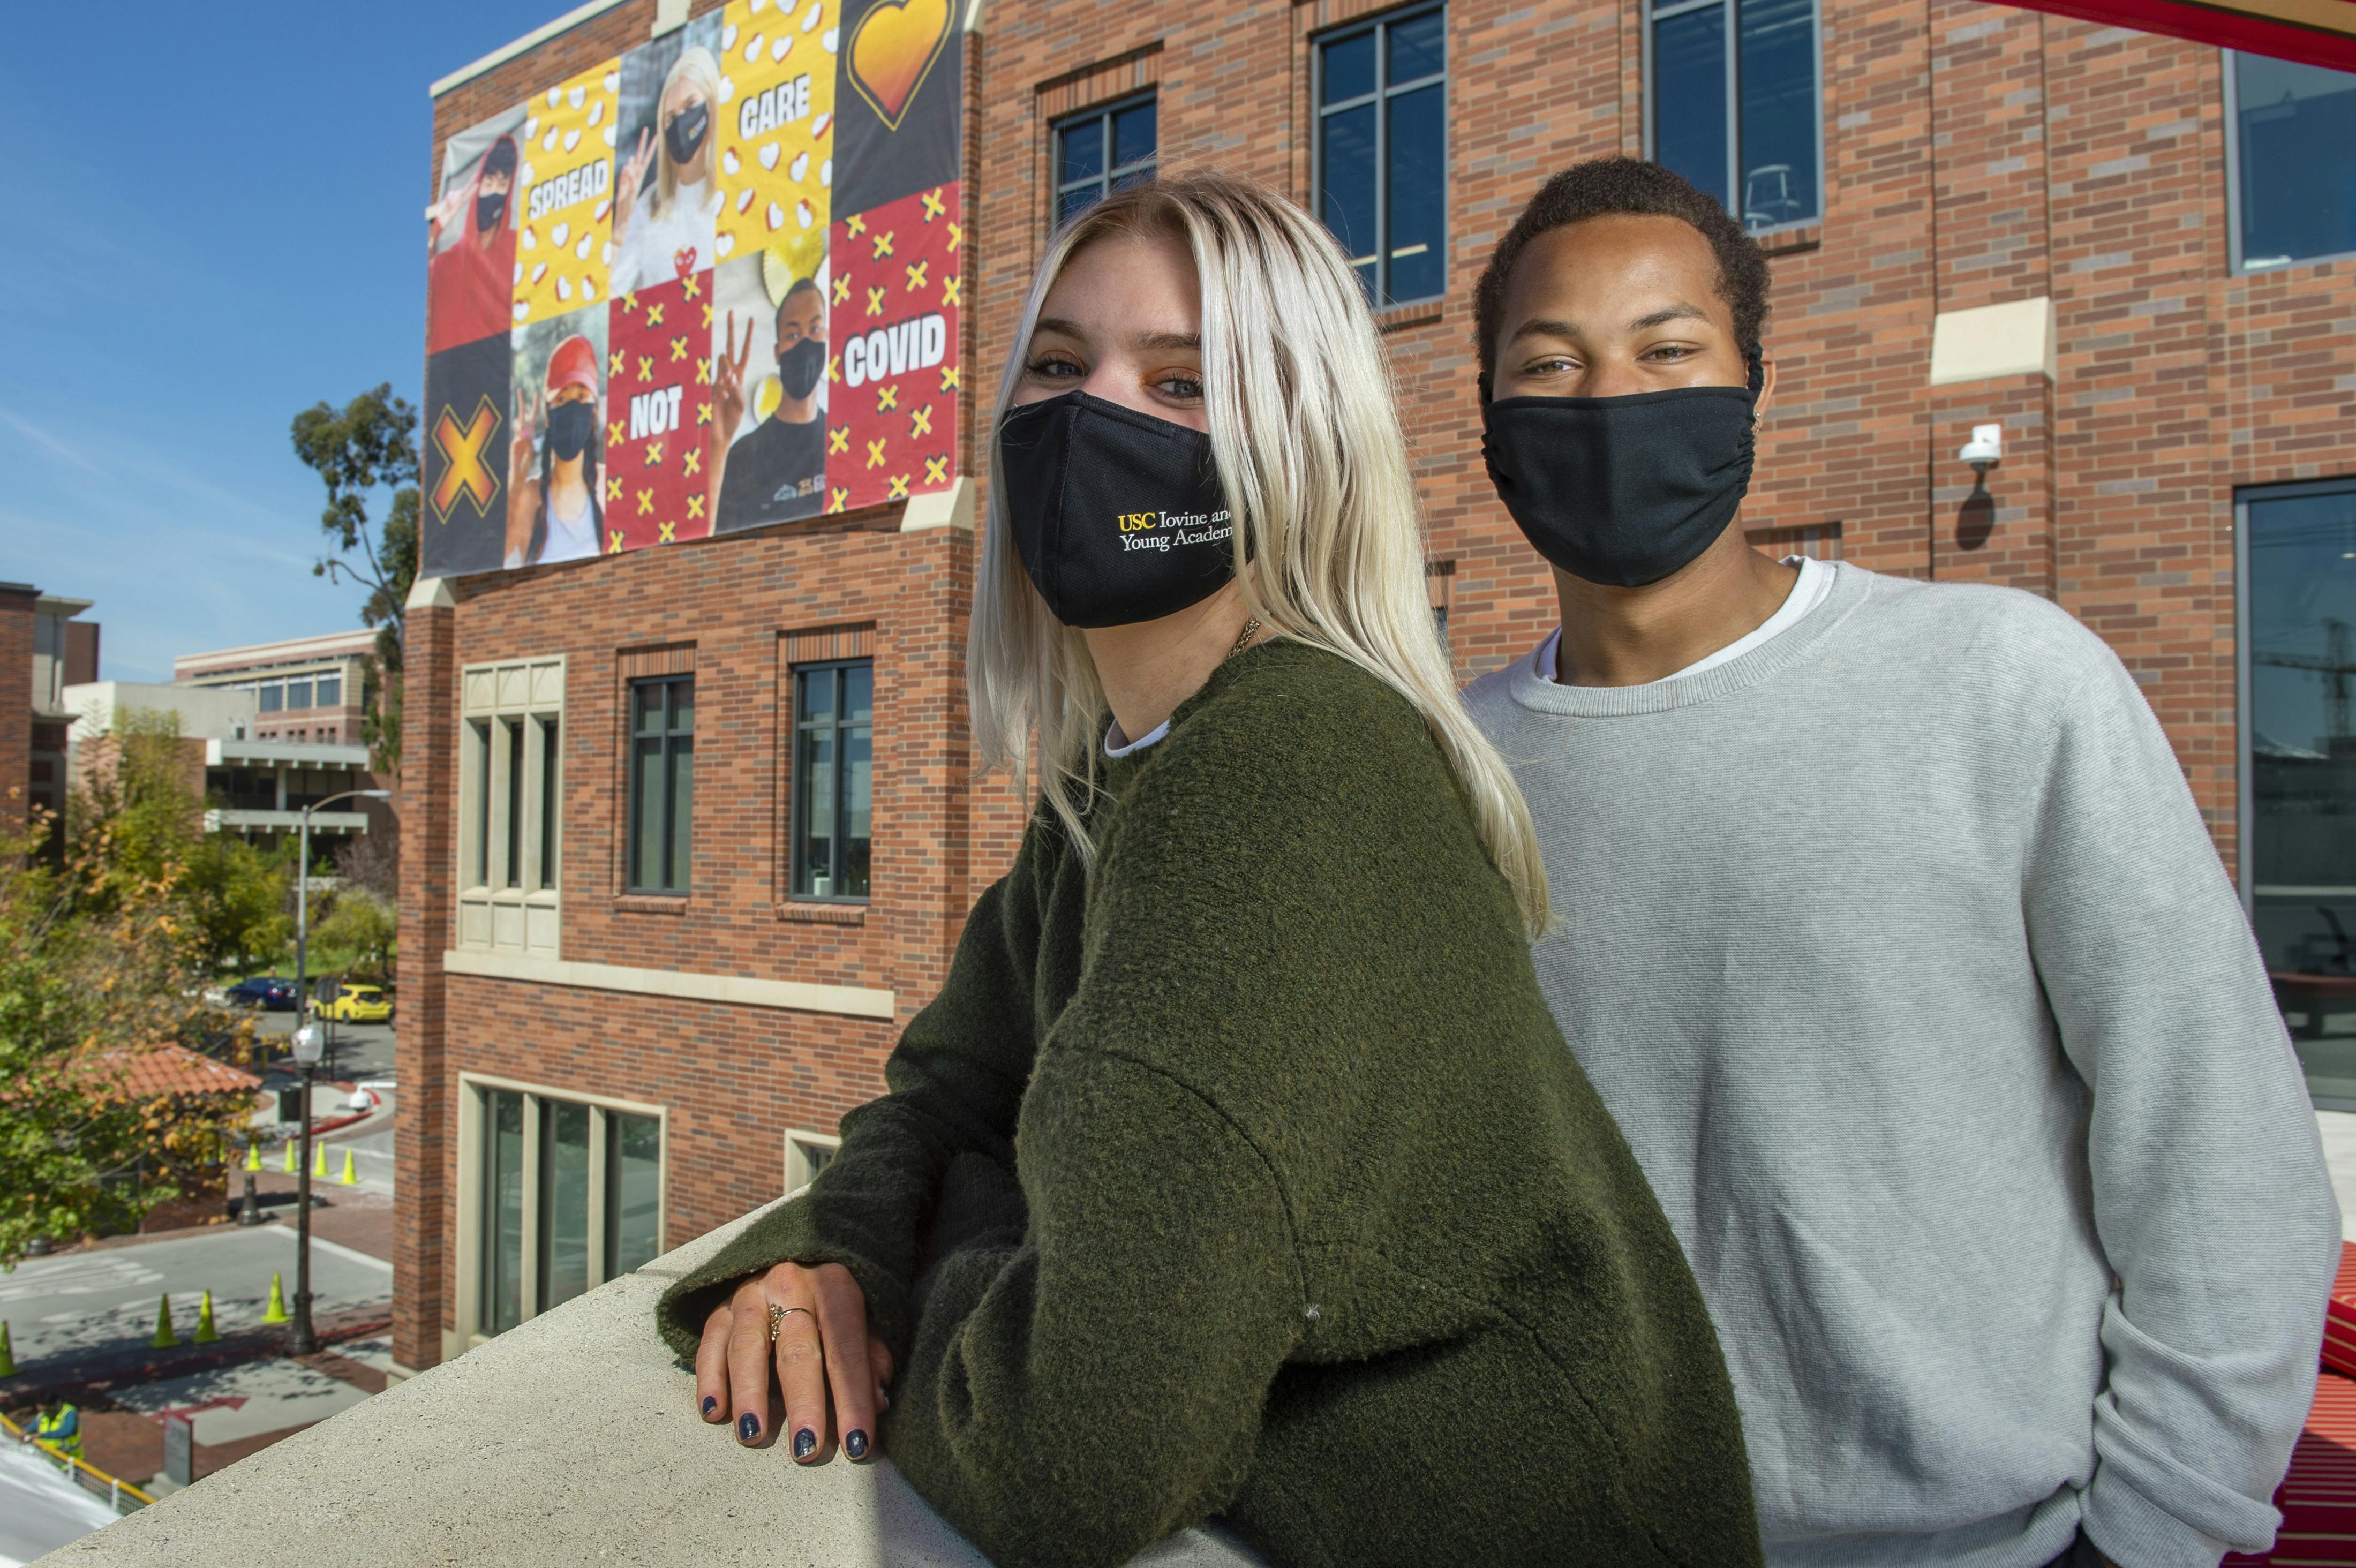 Two masked students in front of building with banner signage